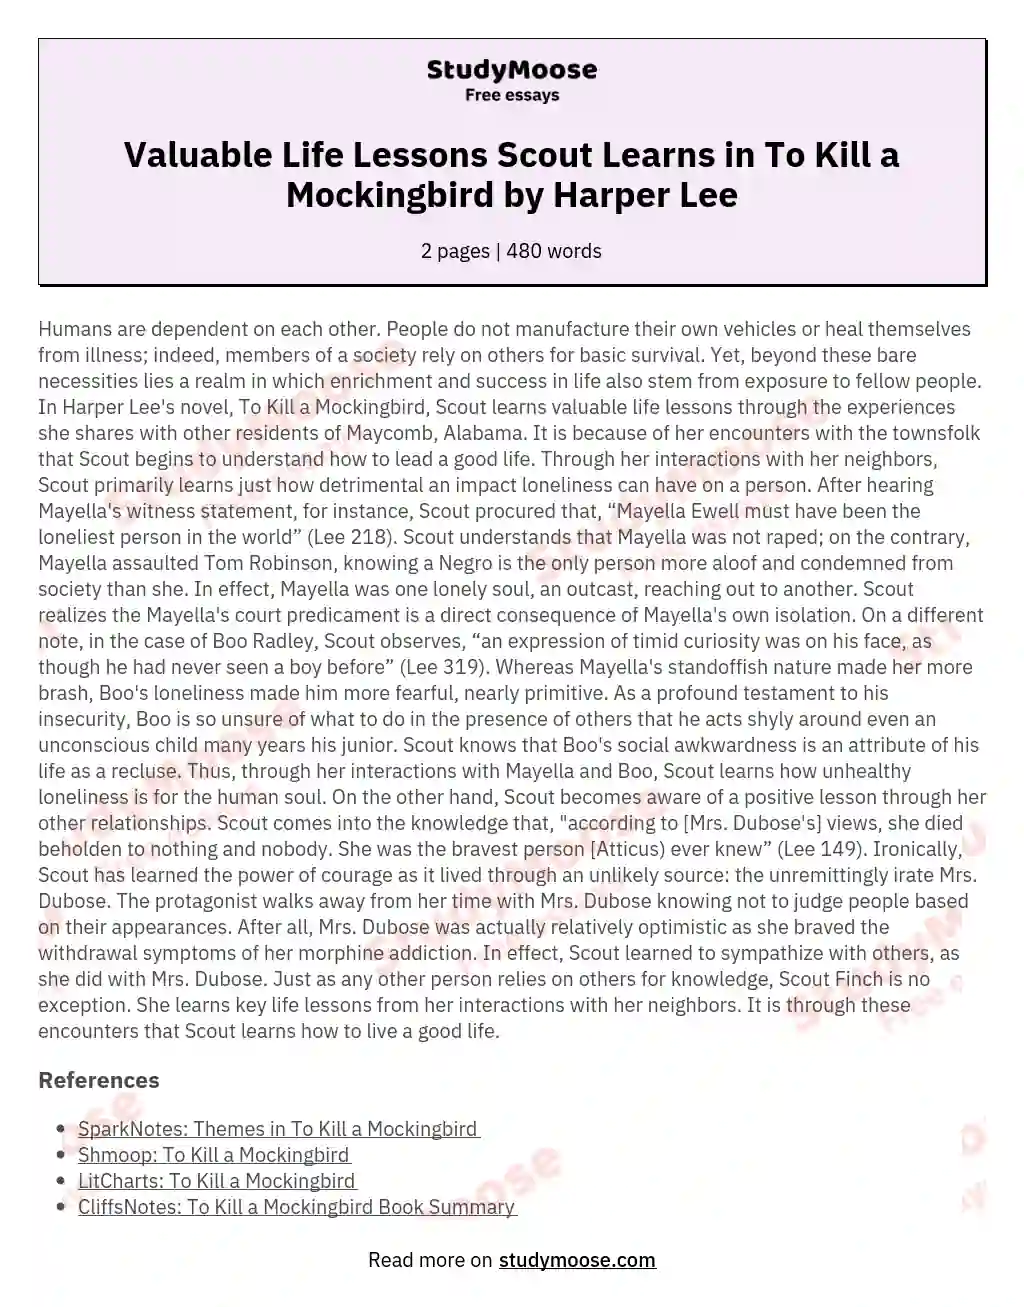 Valuable Life Lessons Scout Learns in To Kill a Mockingbird by Harper Lee essay